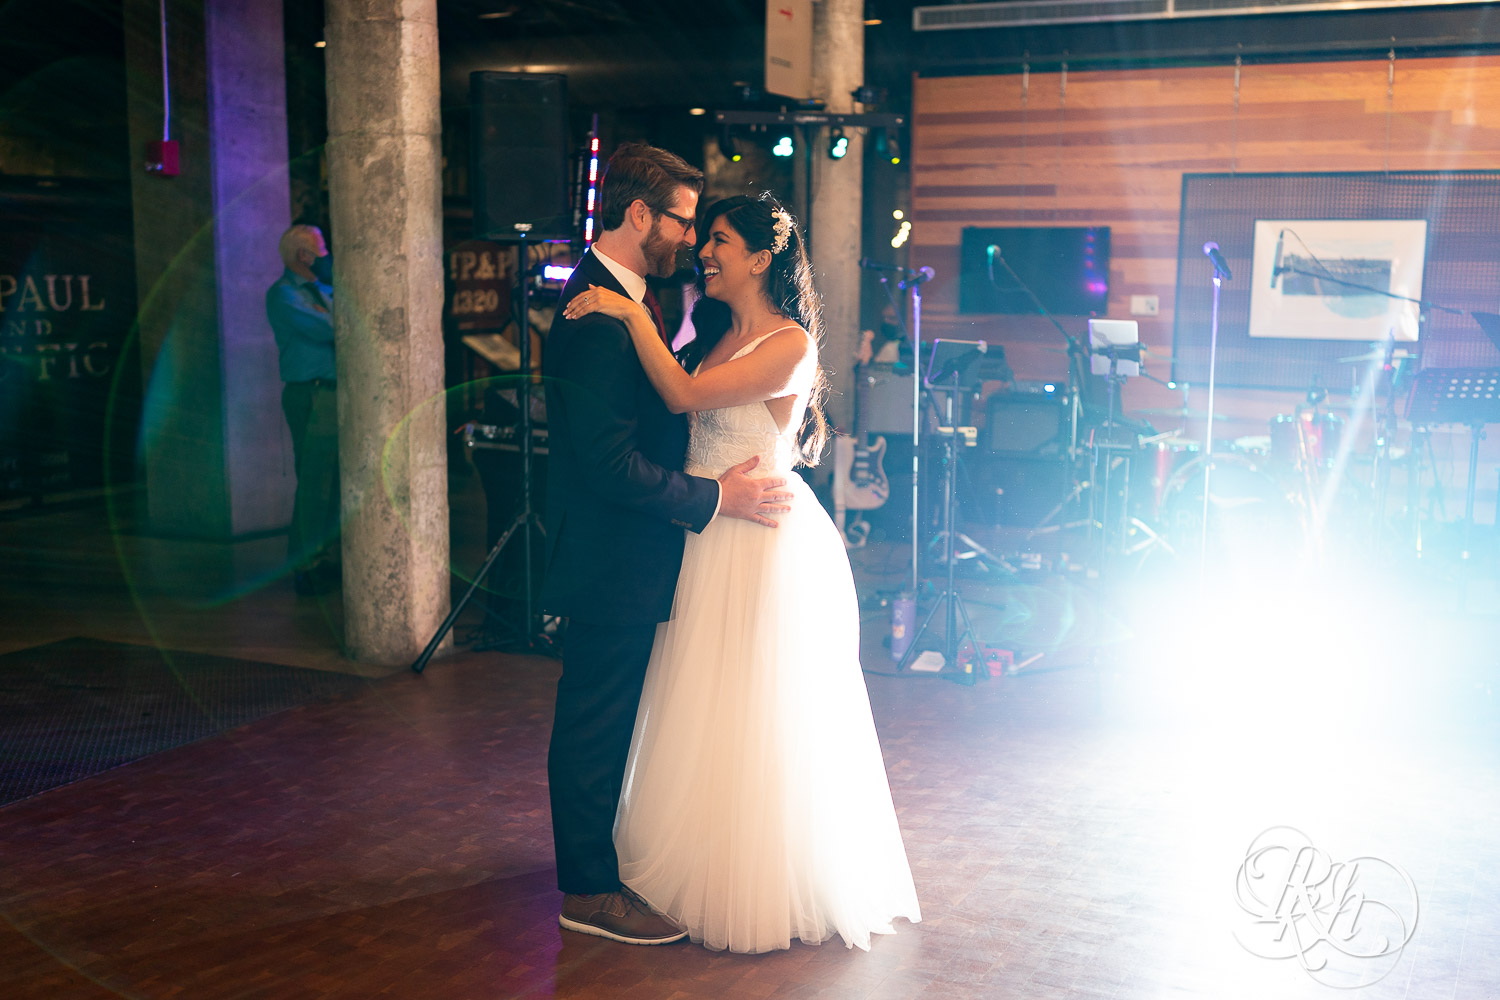 Bride and groom share first dance at wedding reception in Mill City Museum in Minneapolis, Minnesota.